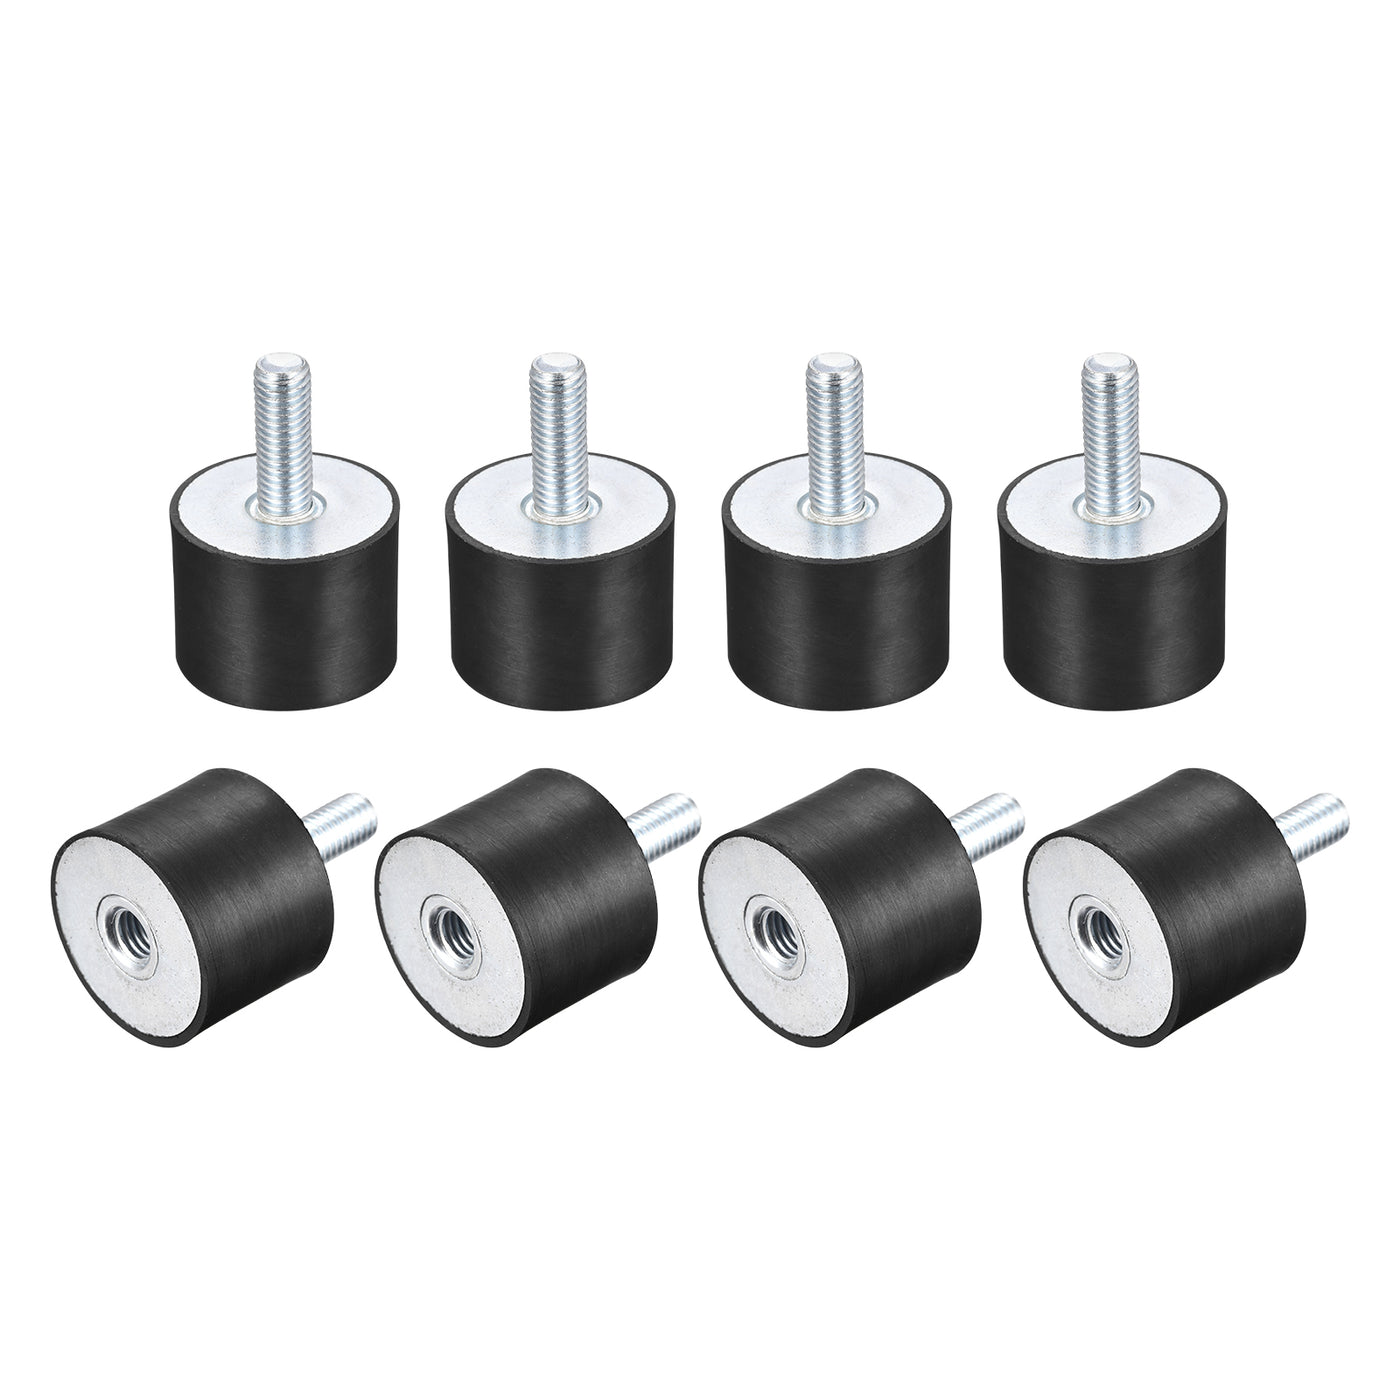 uxcell Uxcell Rubber Mount 8pcs M10 Male/Female Vibration Isolator Shock Absorber D40mmxH30mm